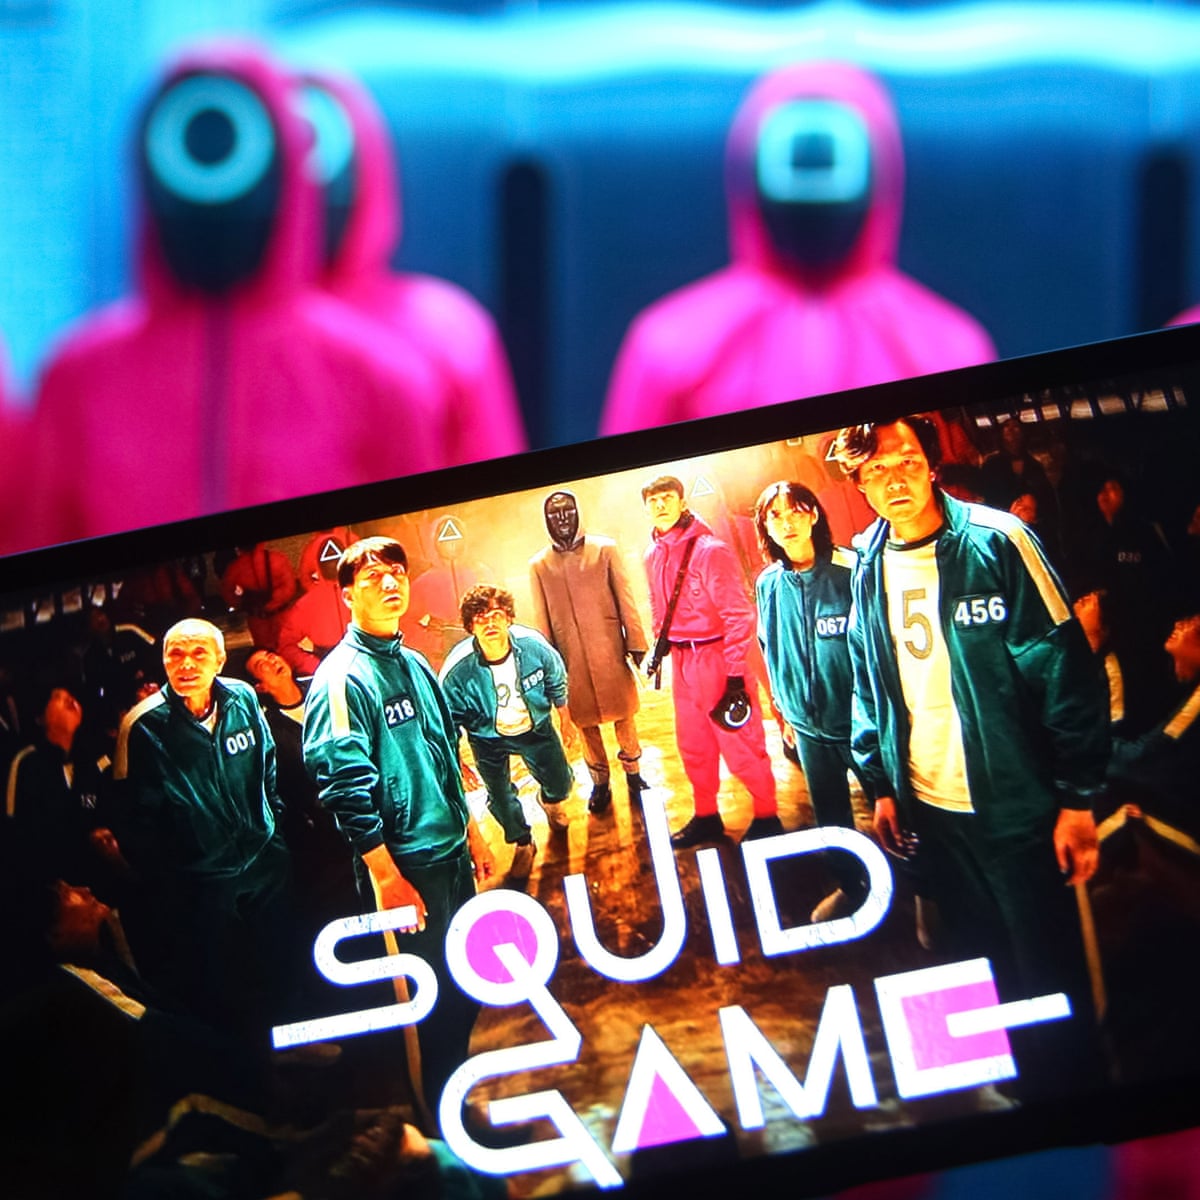 Squid game free watch